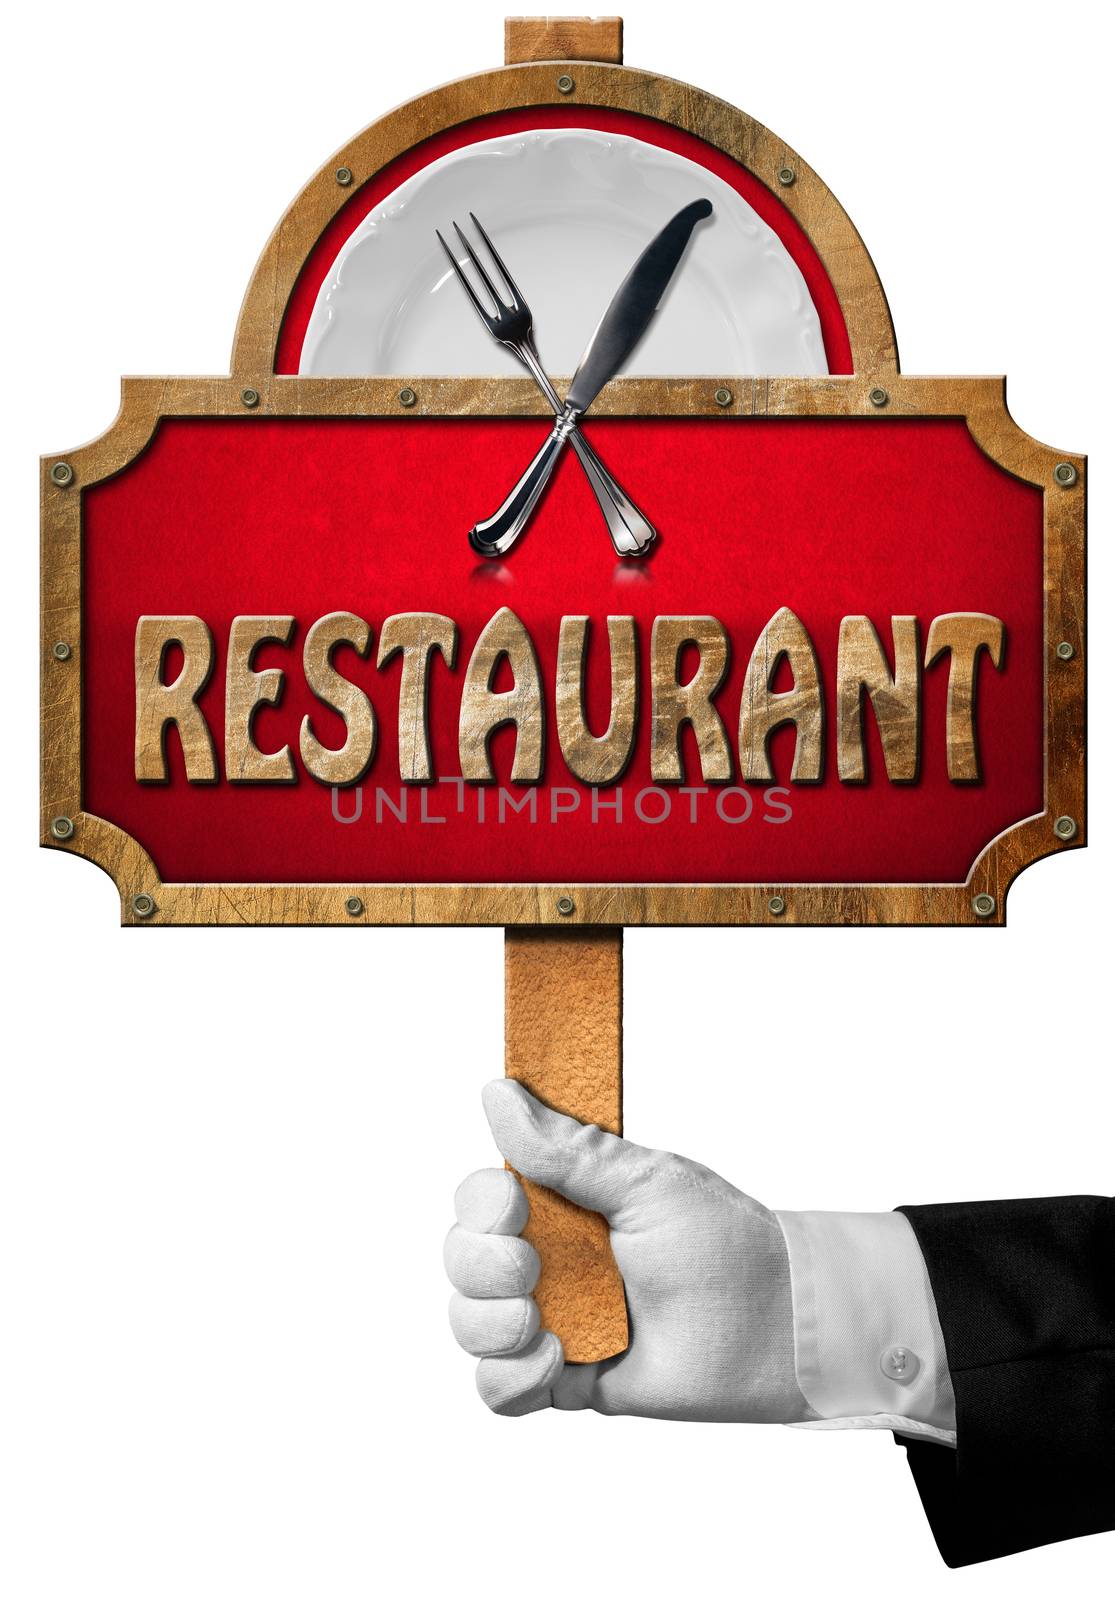 Hand of waiter with white glove holding a pole with sign with empty white plate, silver cutlery and metallic text restaurant. Isolated on white background